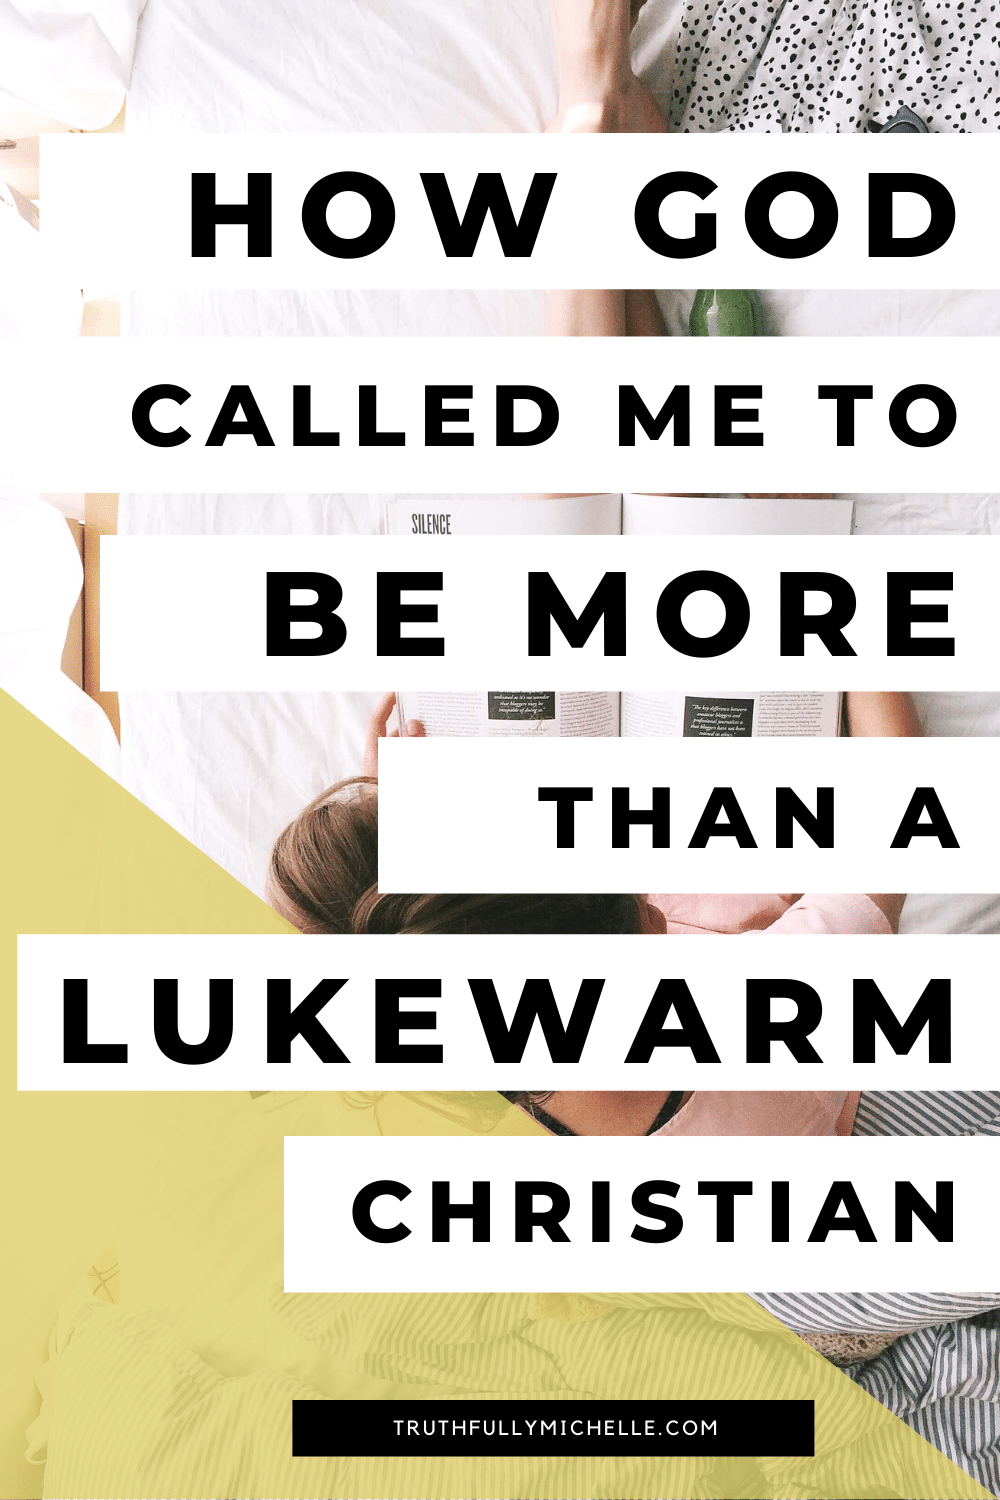 how to be a good christian girl, good church girl, good christian girl, good girls go to church, good girls never miss church, good girls always go to church, lukewarm christian truths, lukewarm christianity, don't be a lukewarm christian, christian testimonies, christian testimony true stories, christian testimony examples